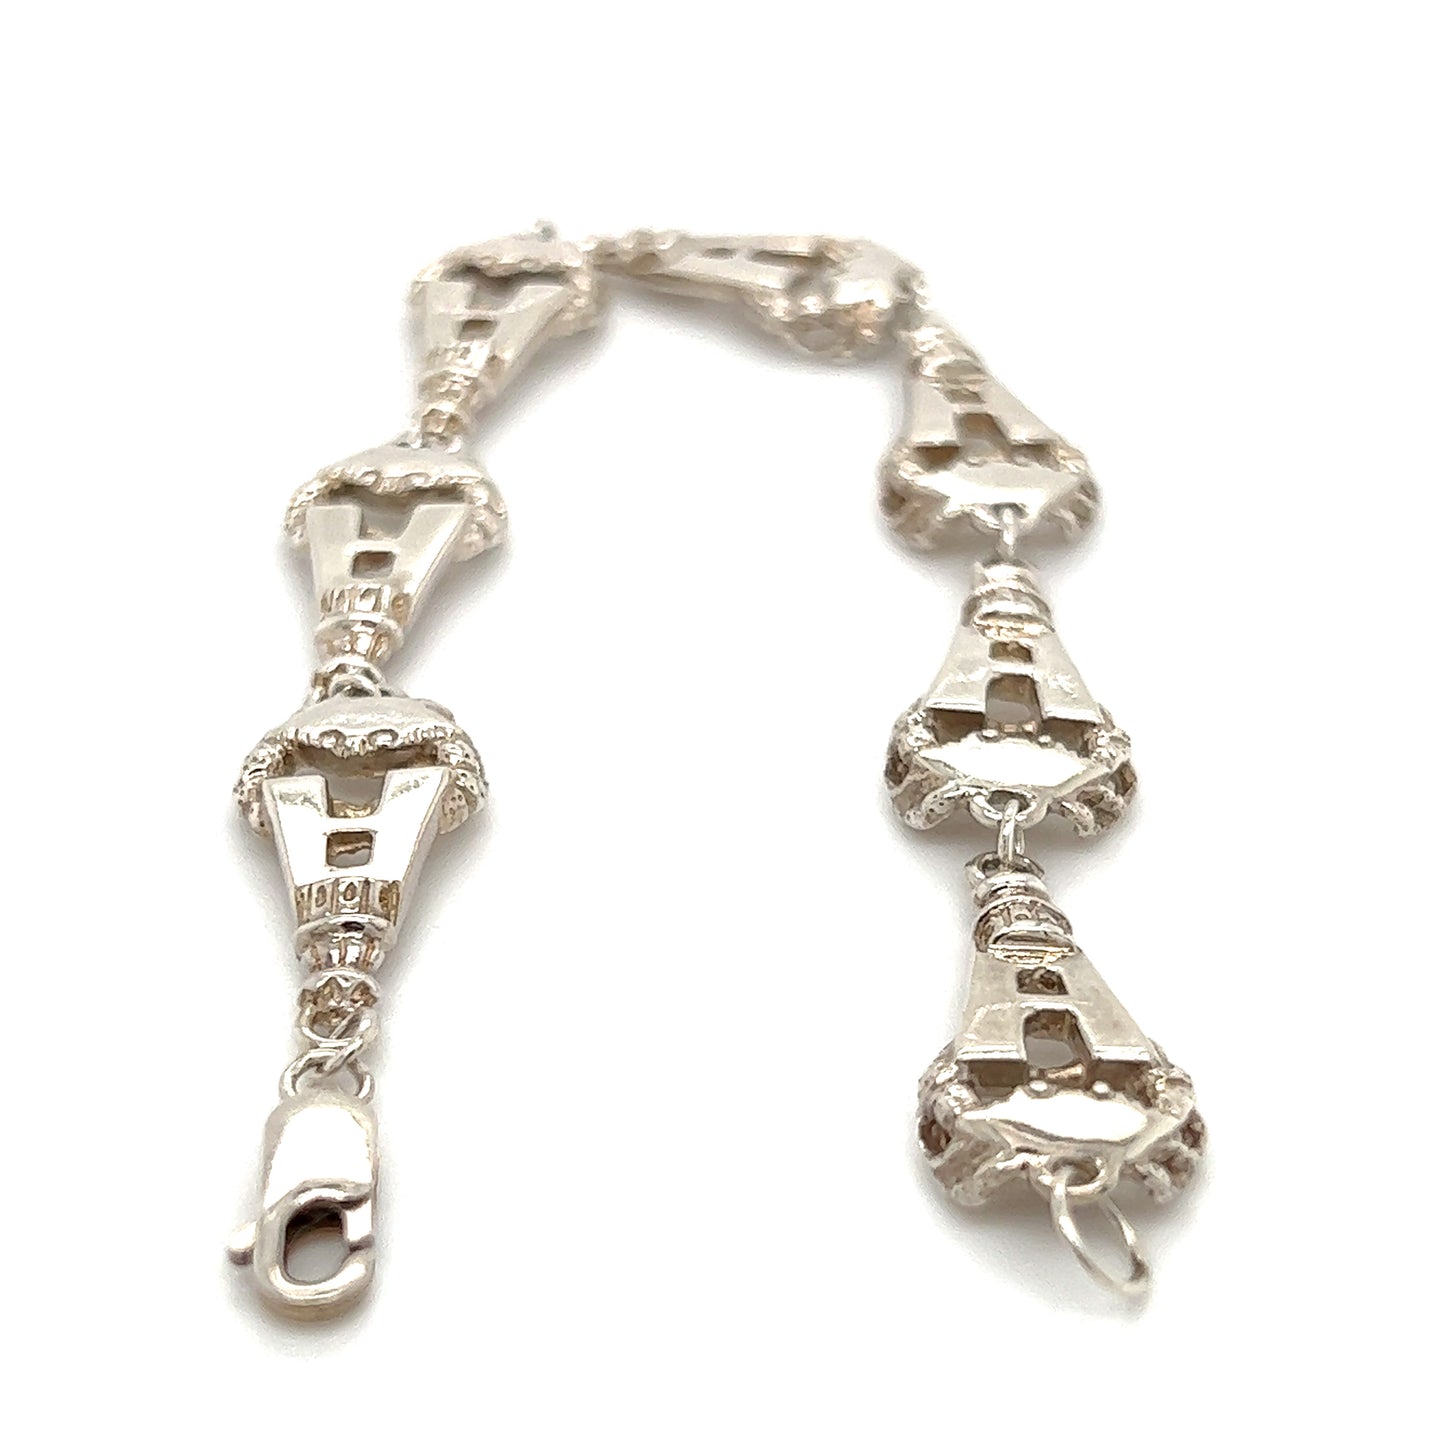 Annapolis Link Bracelet with Seven Crabs in Sterling Silver Clasp and Details View